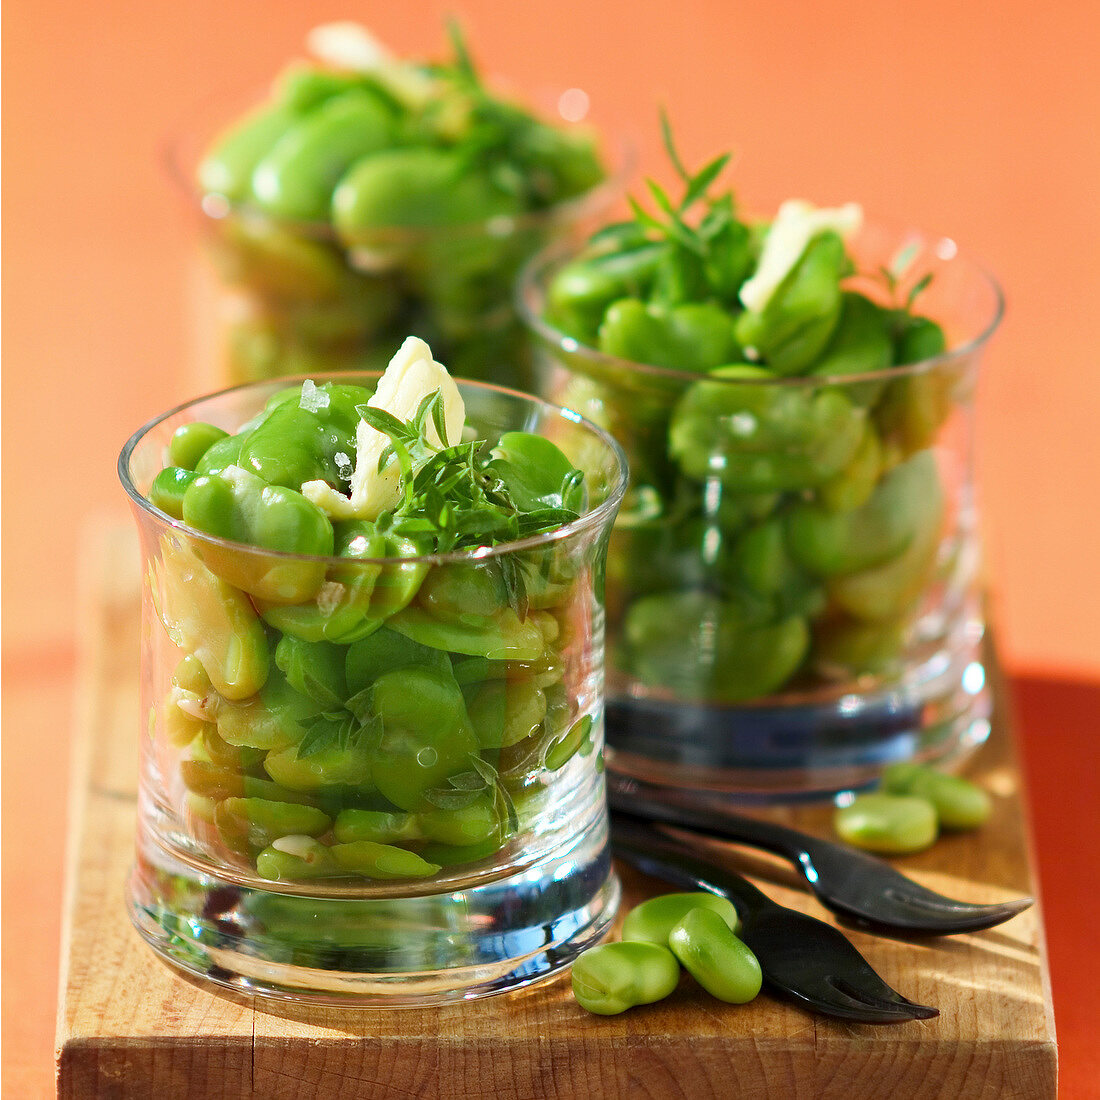 Broad beans with savory (topic: Provence)